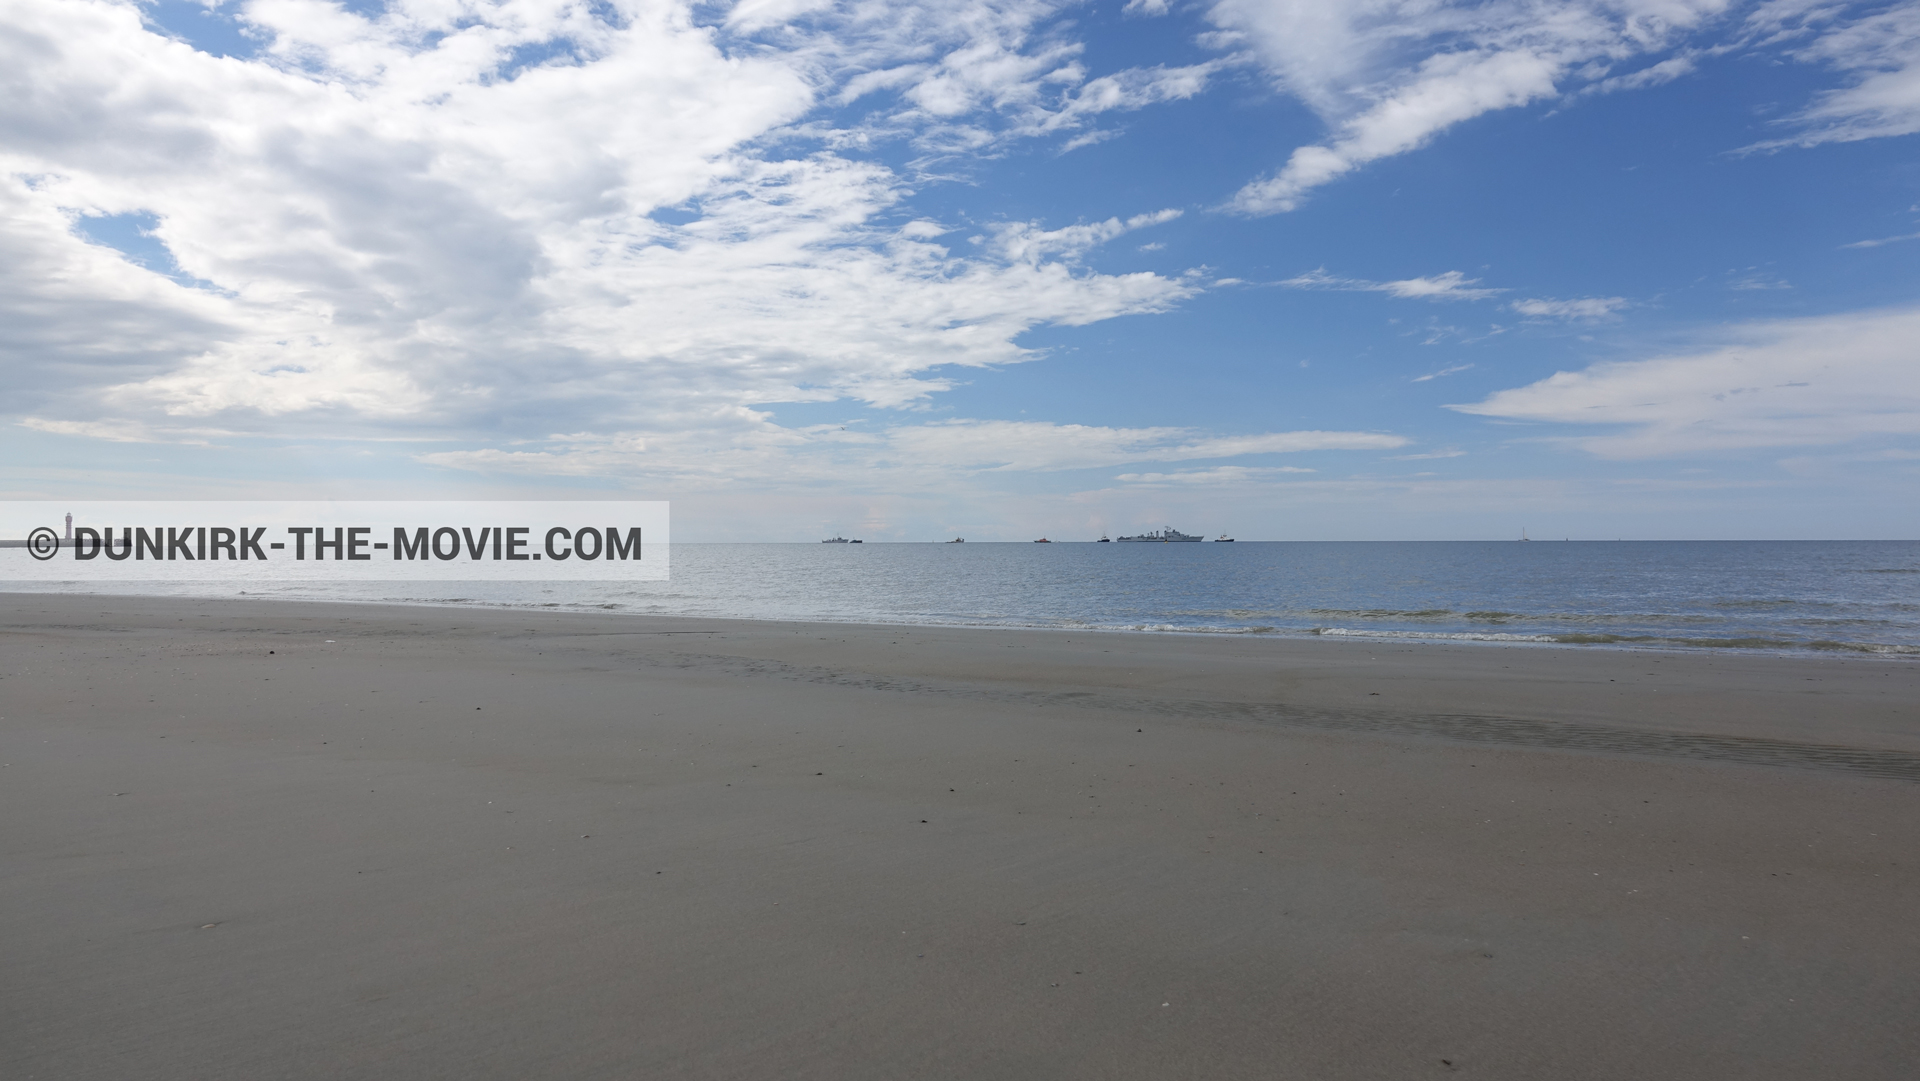 Picture with boat, cloudy sky, St Pol sur Mer lighthouse, beach,  from behind the scene of the Dunkirk movie by Nolan